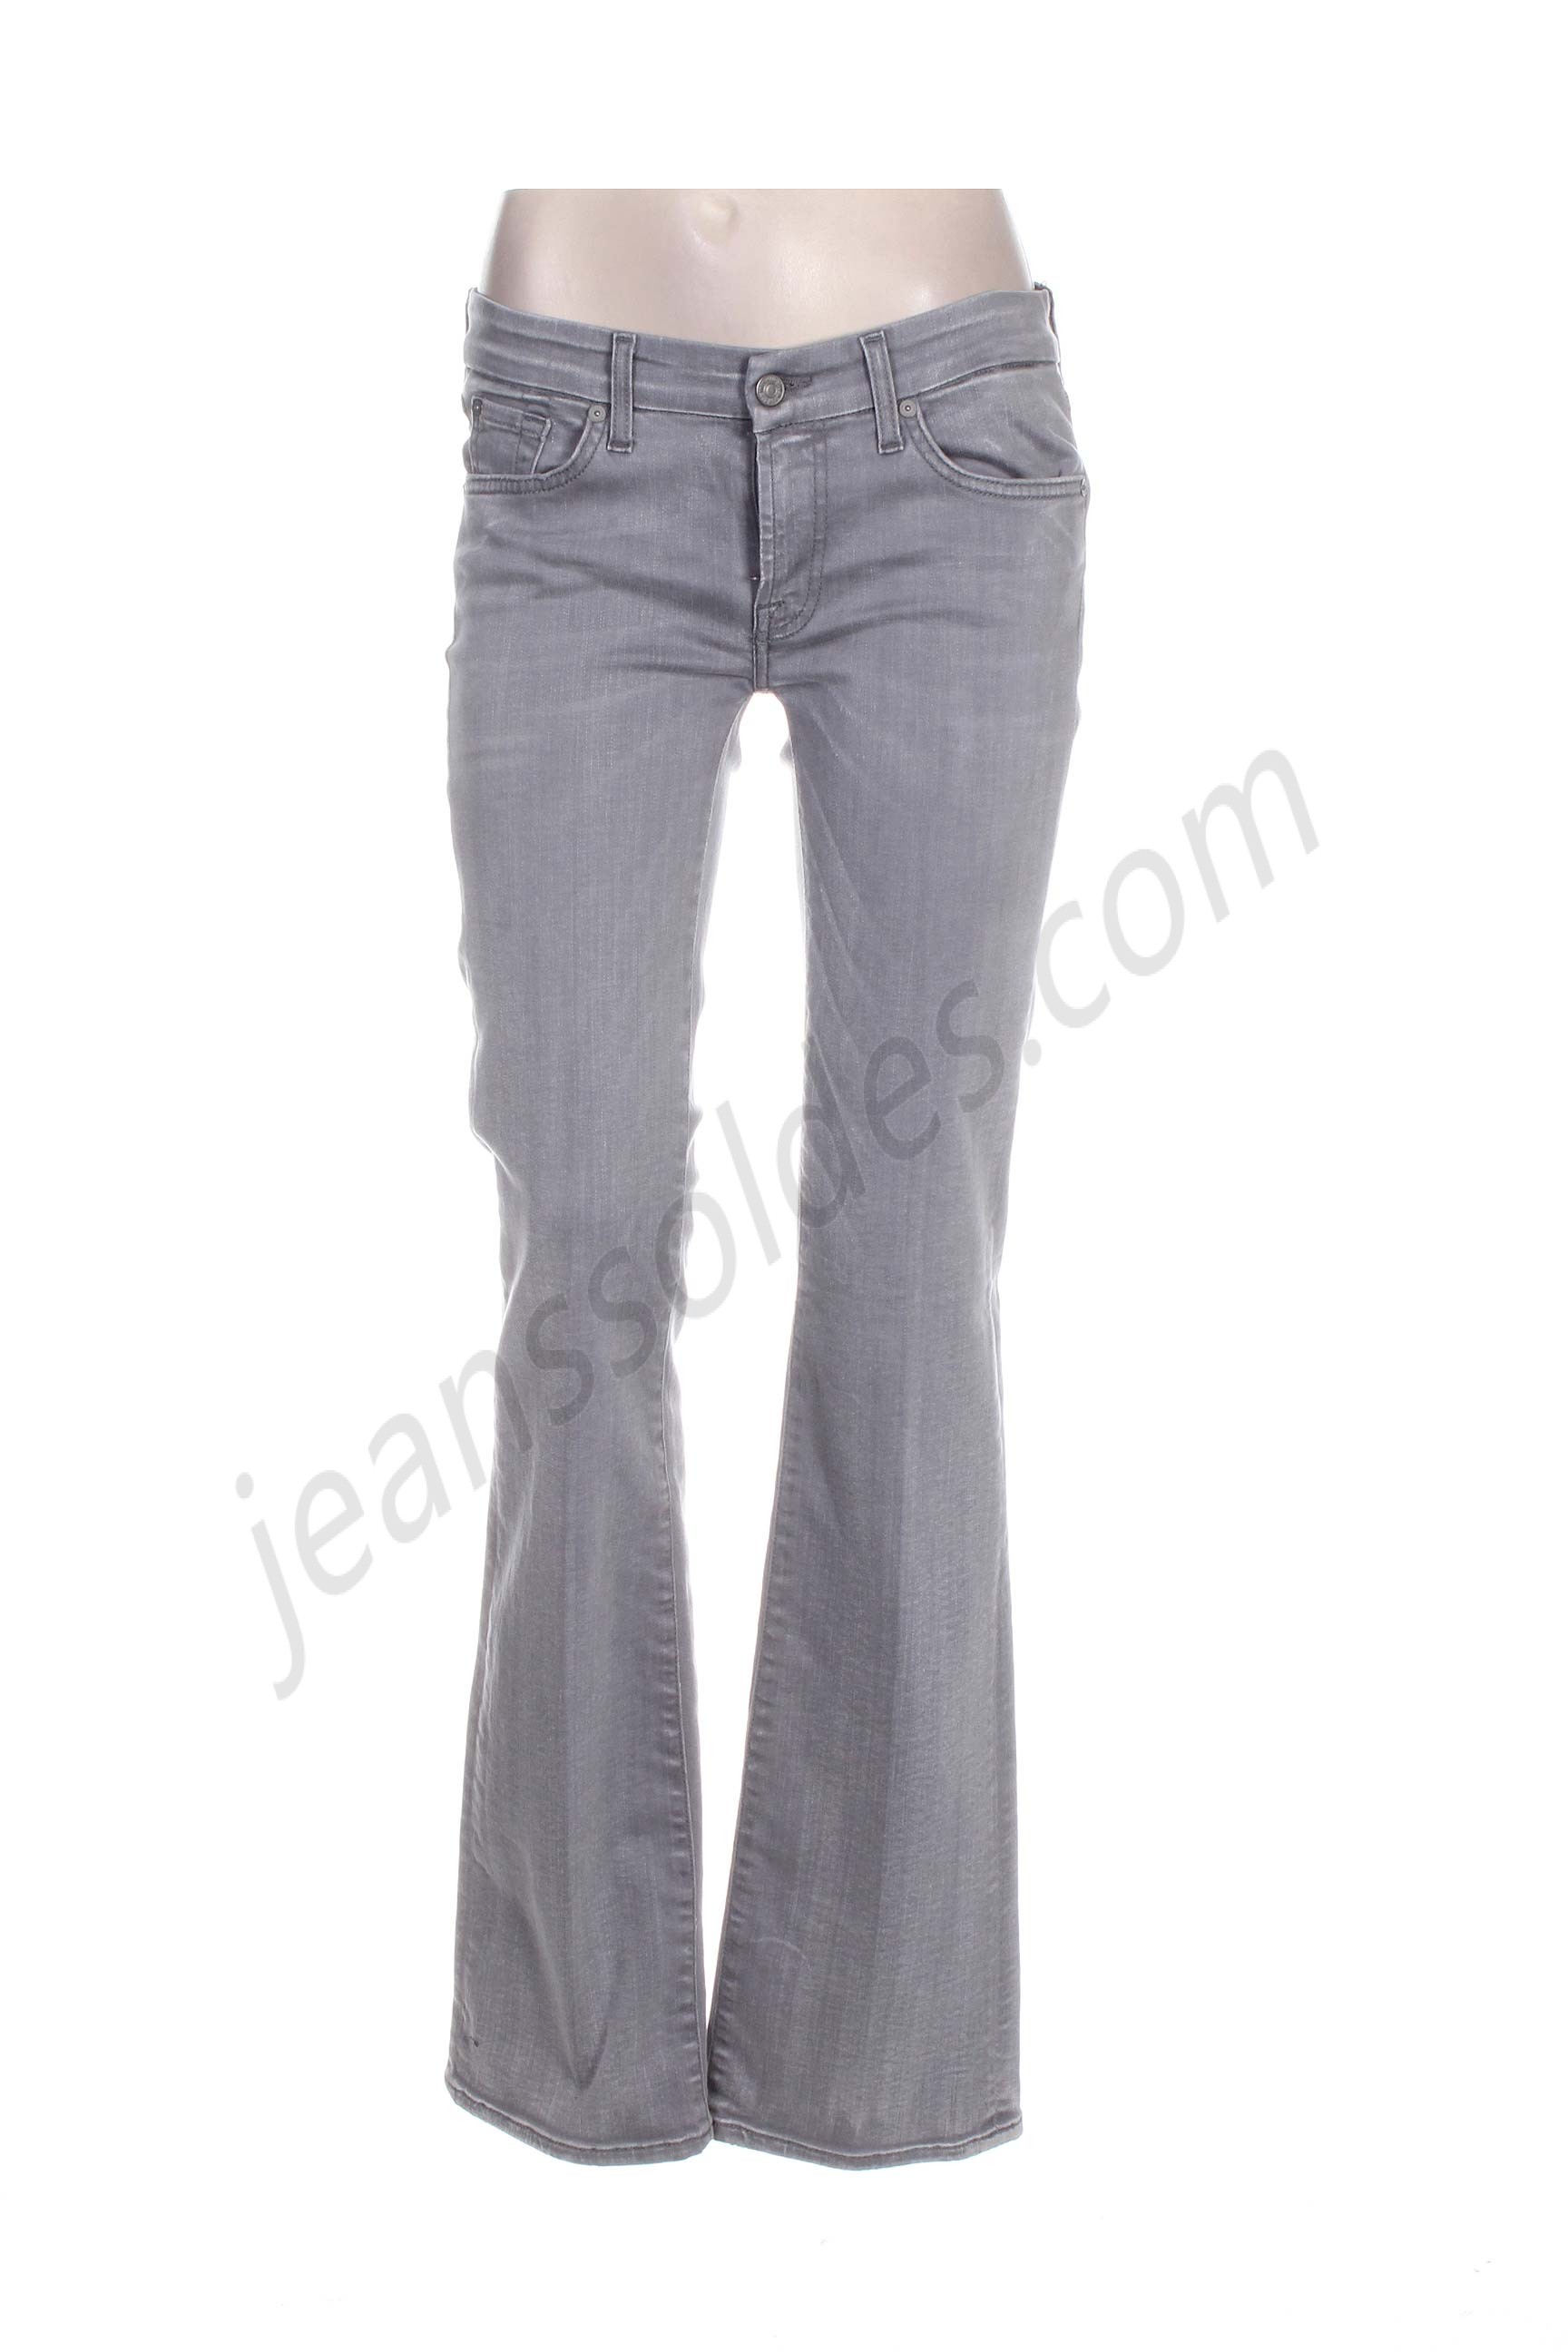 for all mankind-Jeans coupe droite prix d’amis - for all mankind-Jeans coupe droite prix d’amis